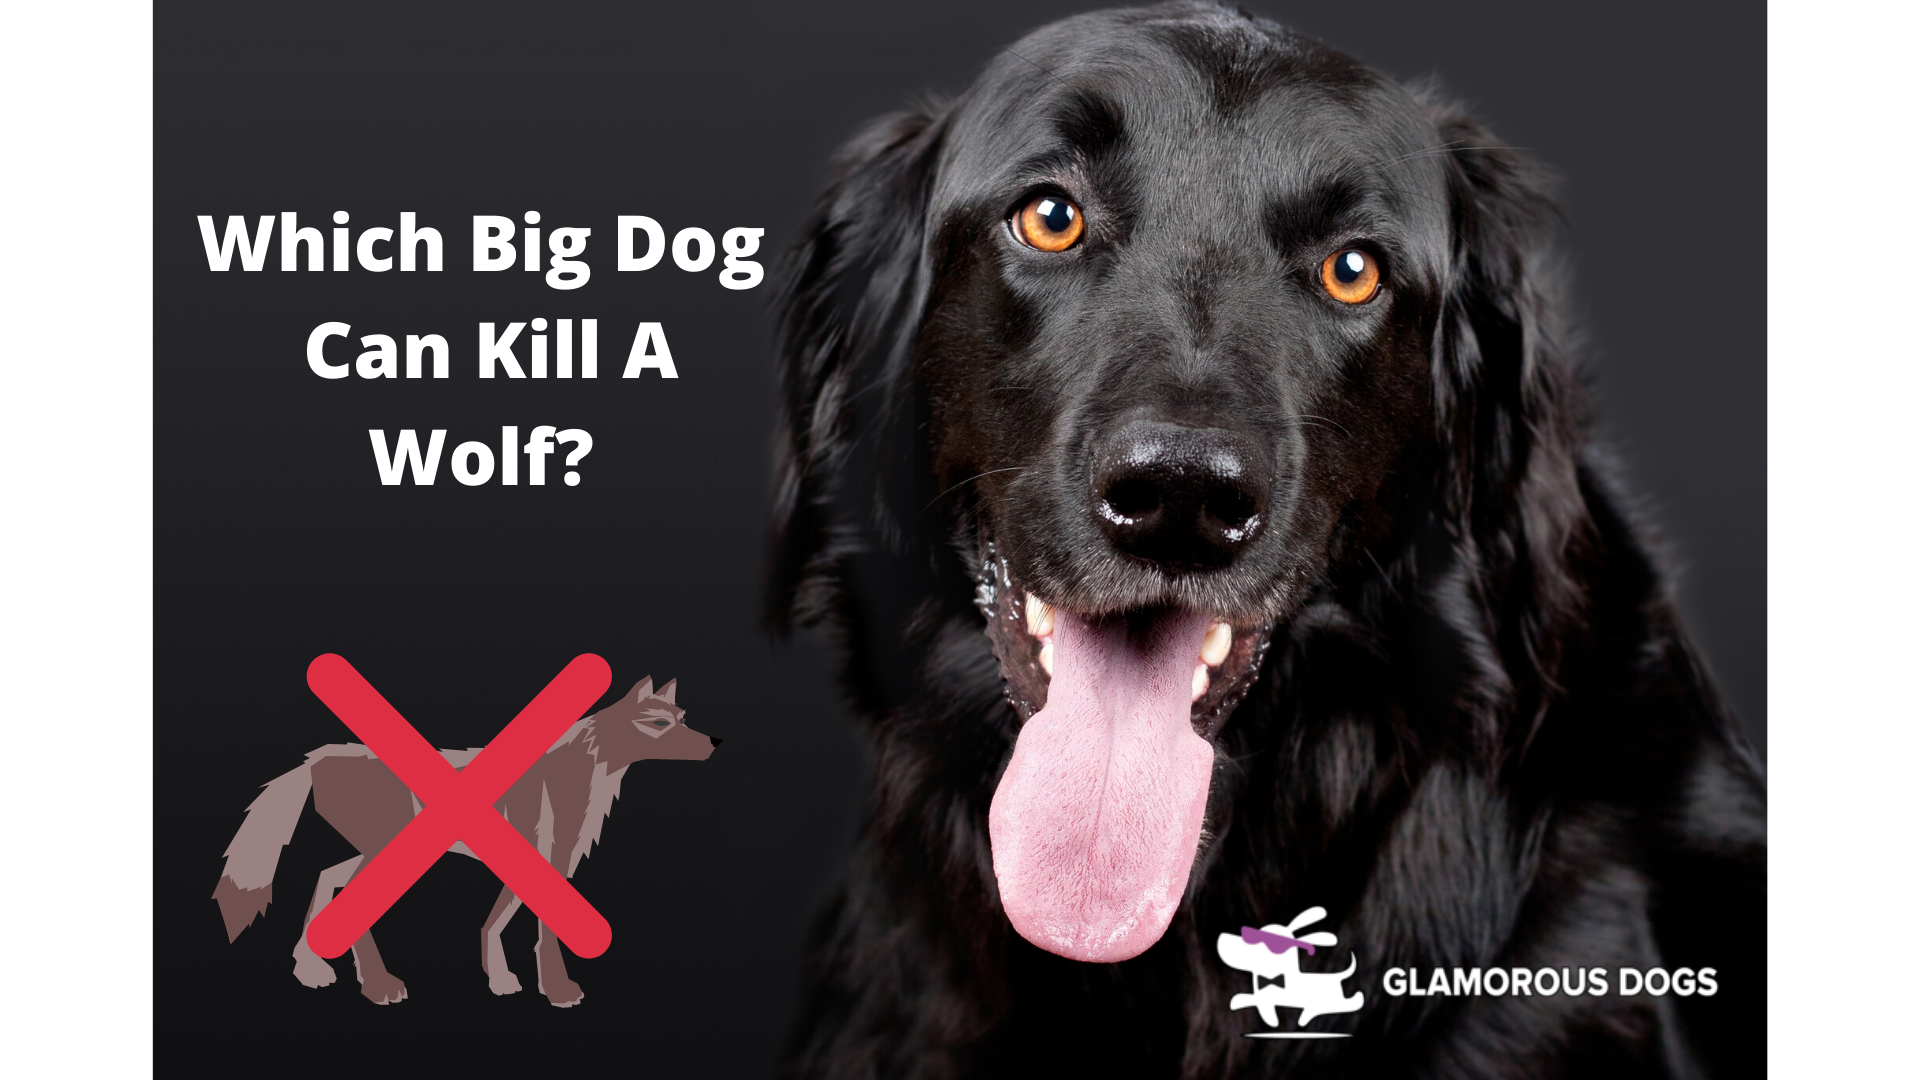 Which Big Dog Can Kill A Wolf?